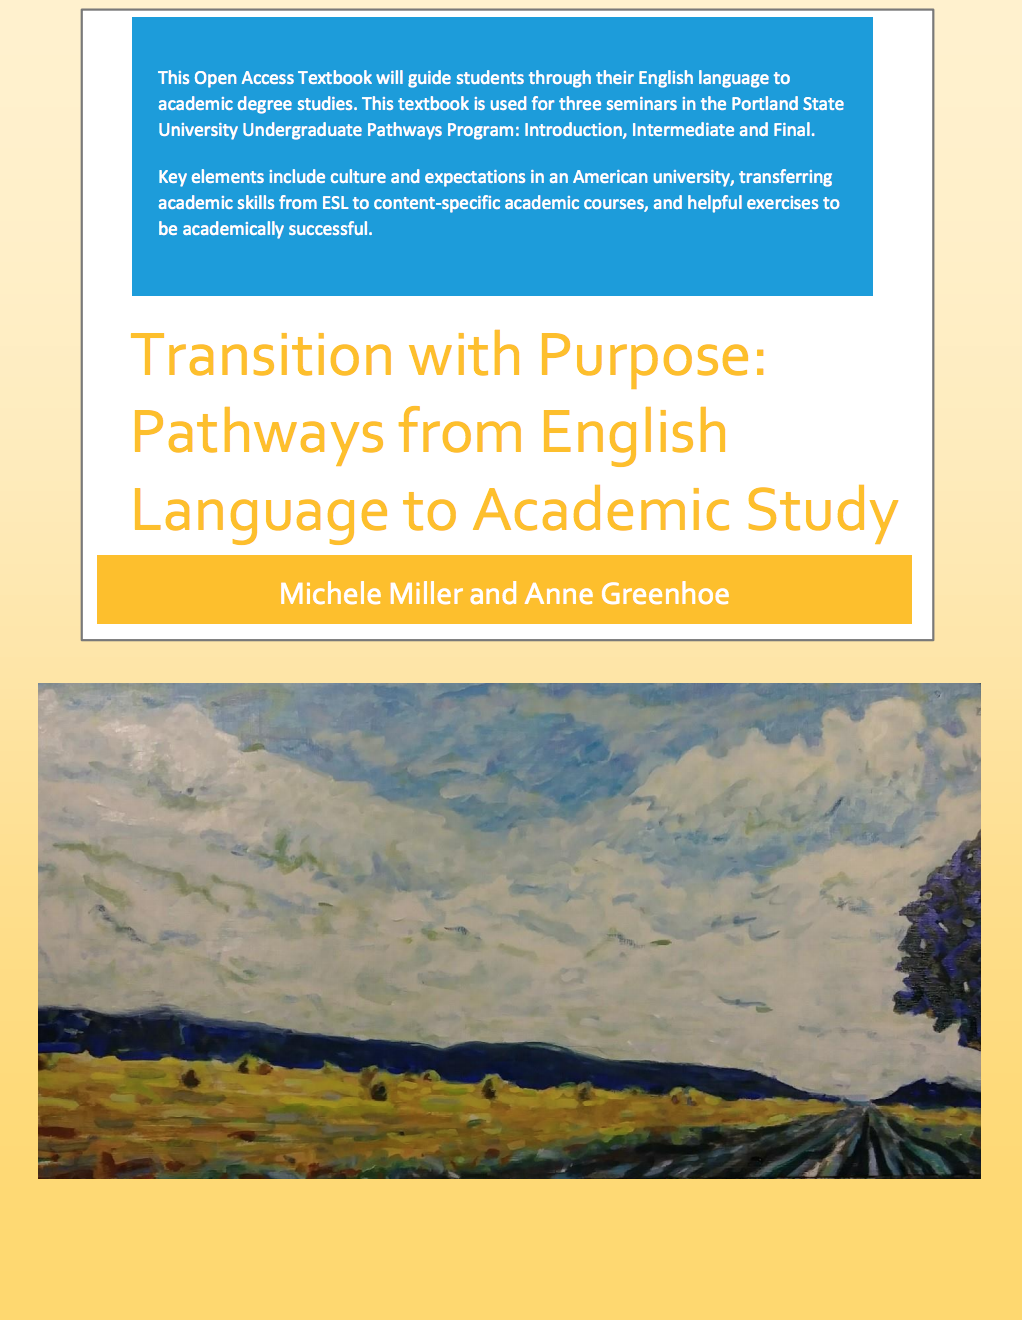 Read more about Transition with Purpose: Pathways from English Language to Academic Study